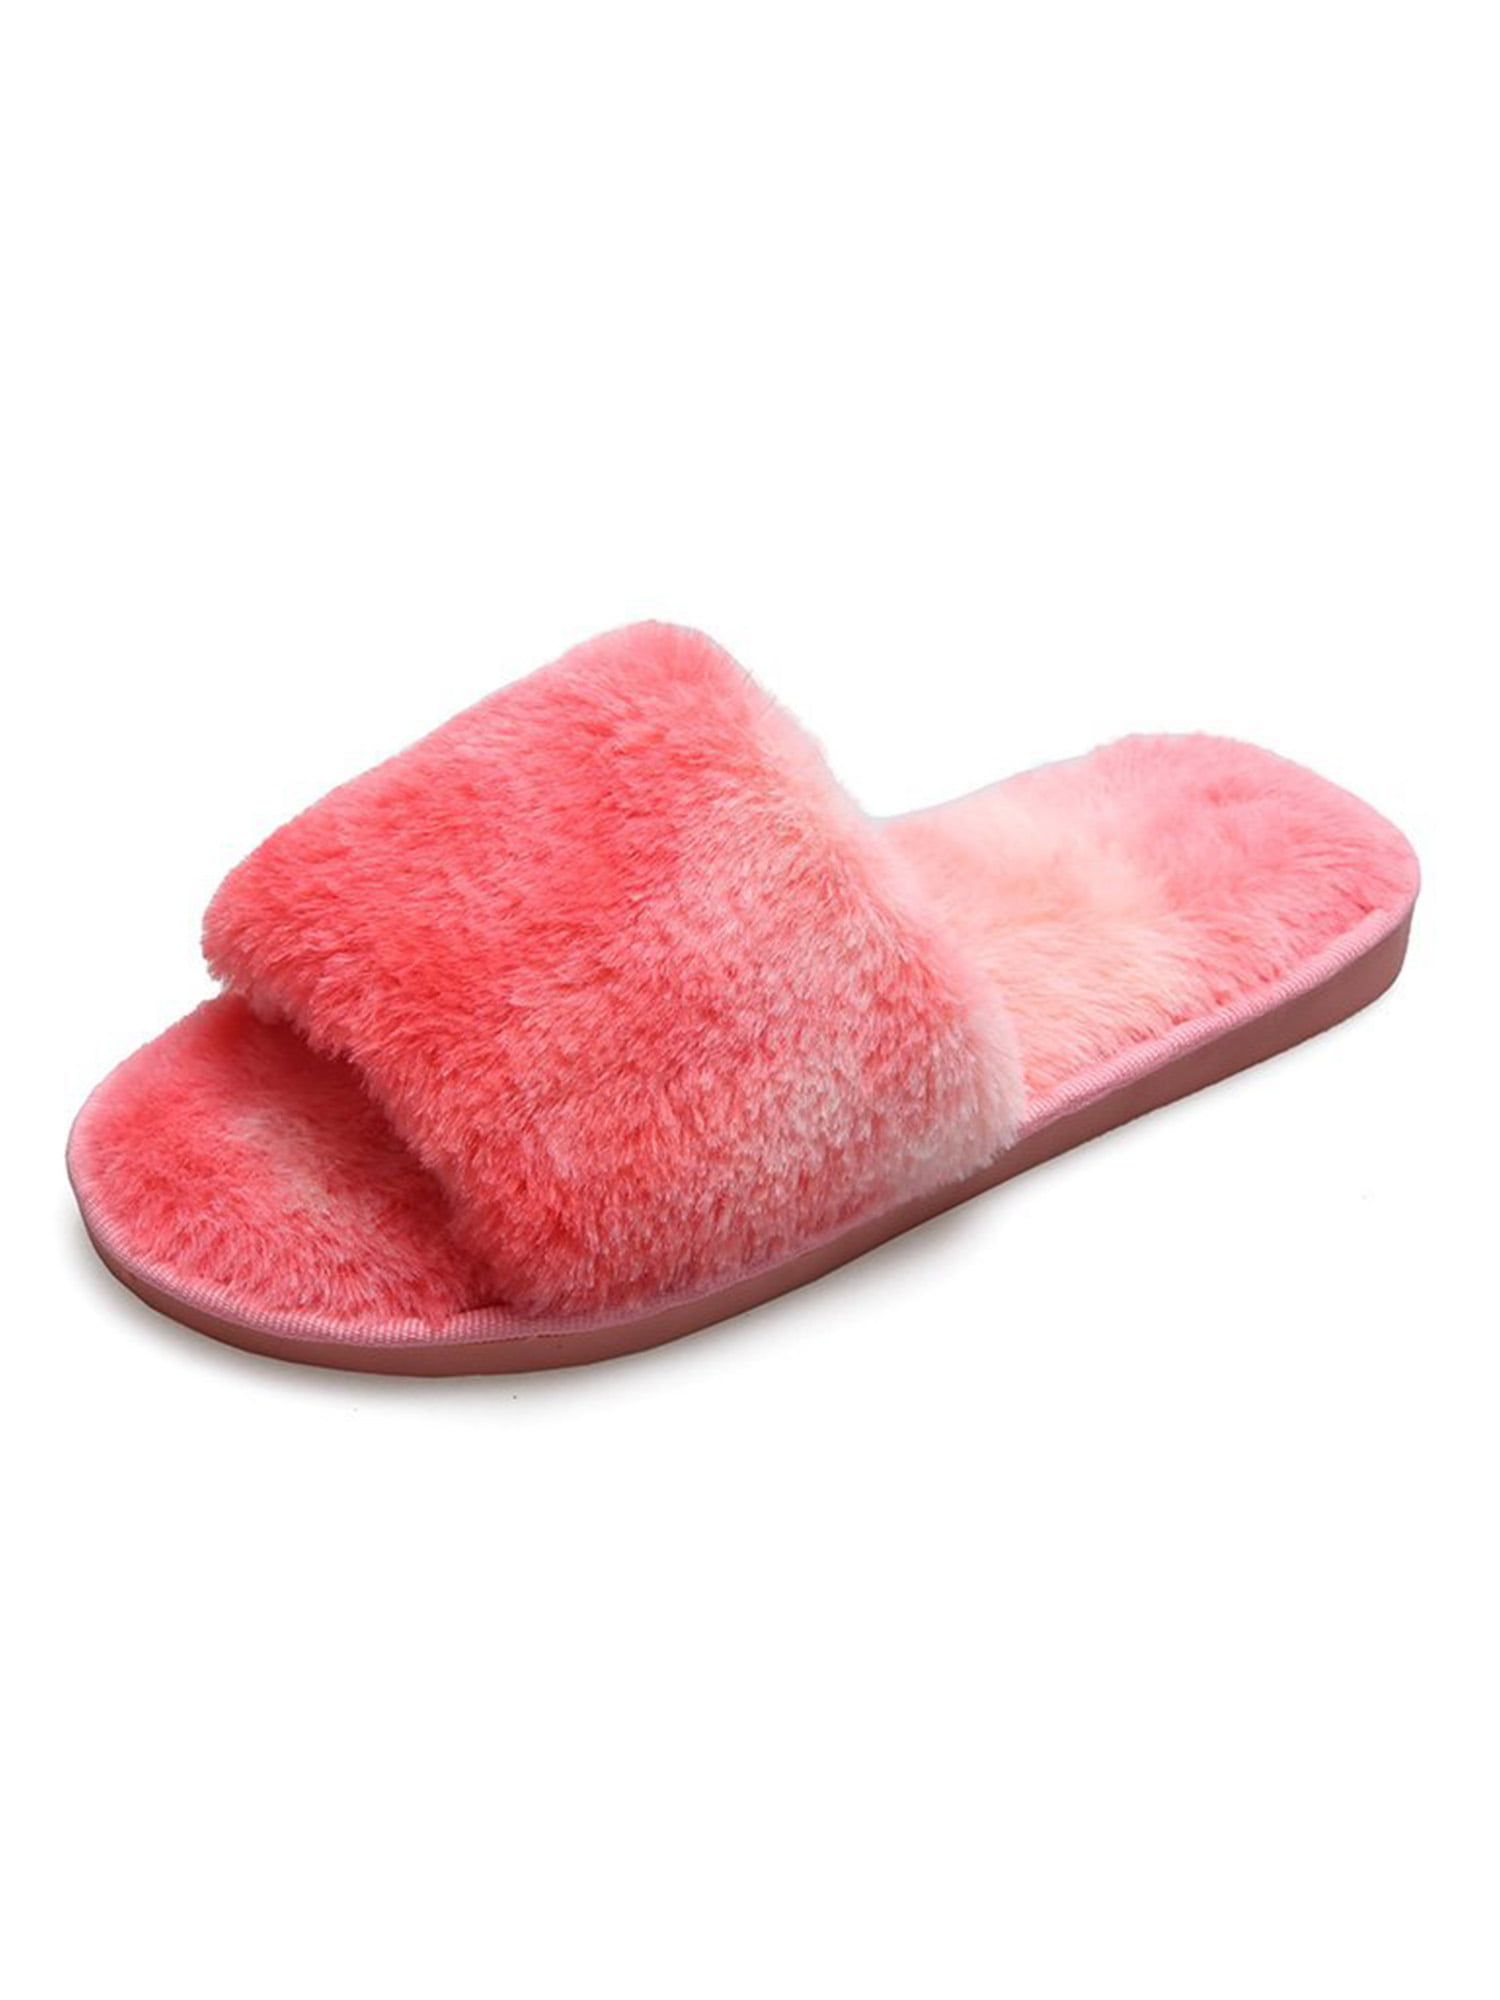 LADIES WOMENS WINTER WARM FAUX FUR LINED BEDROOM HOUSE SLIPPERS SHOES SIZE 